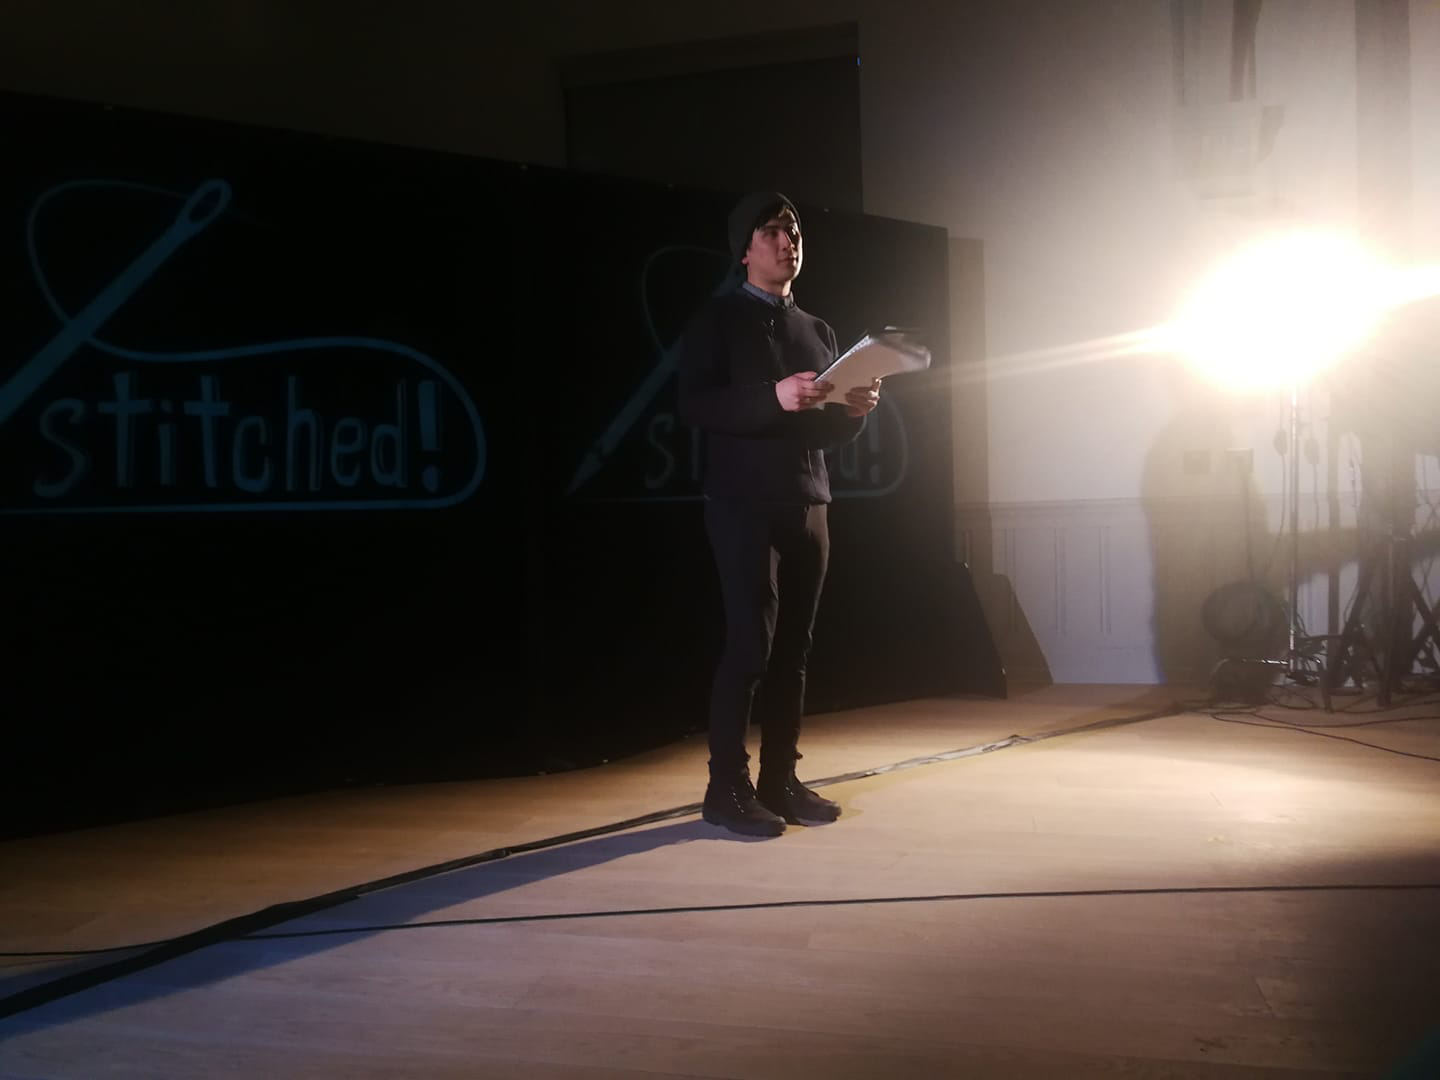 Adam Chen performing in Stitched!